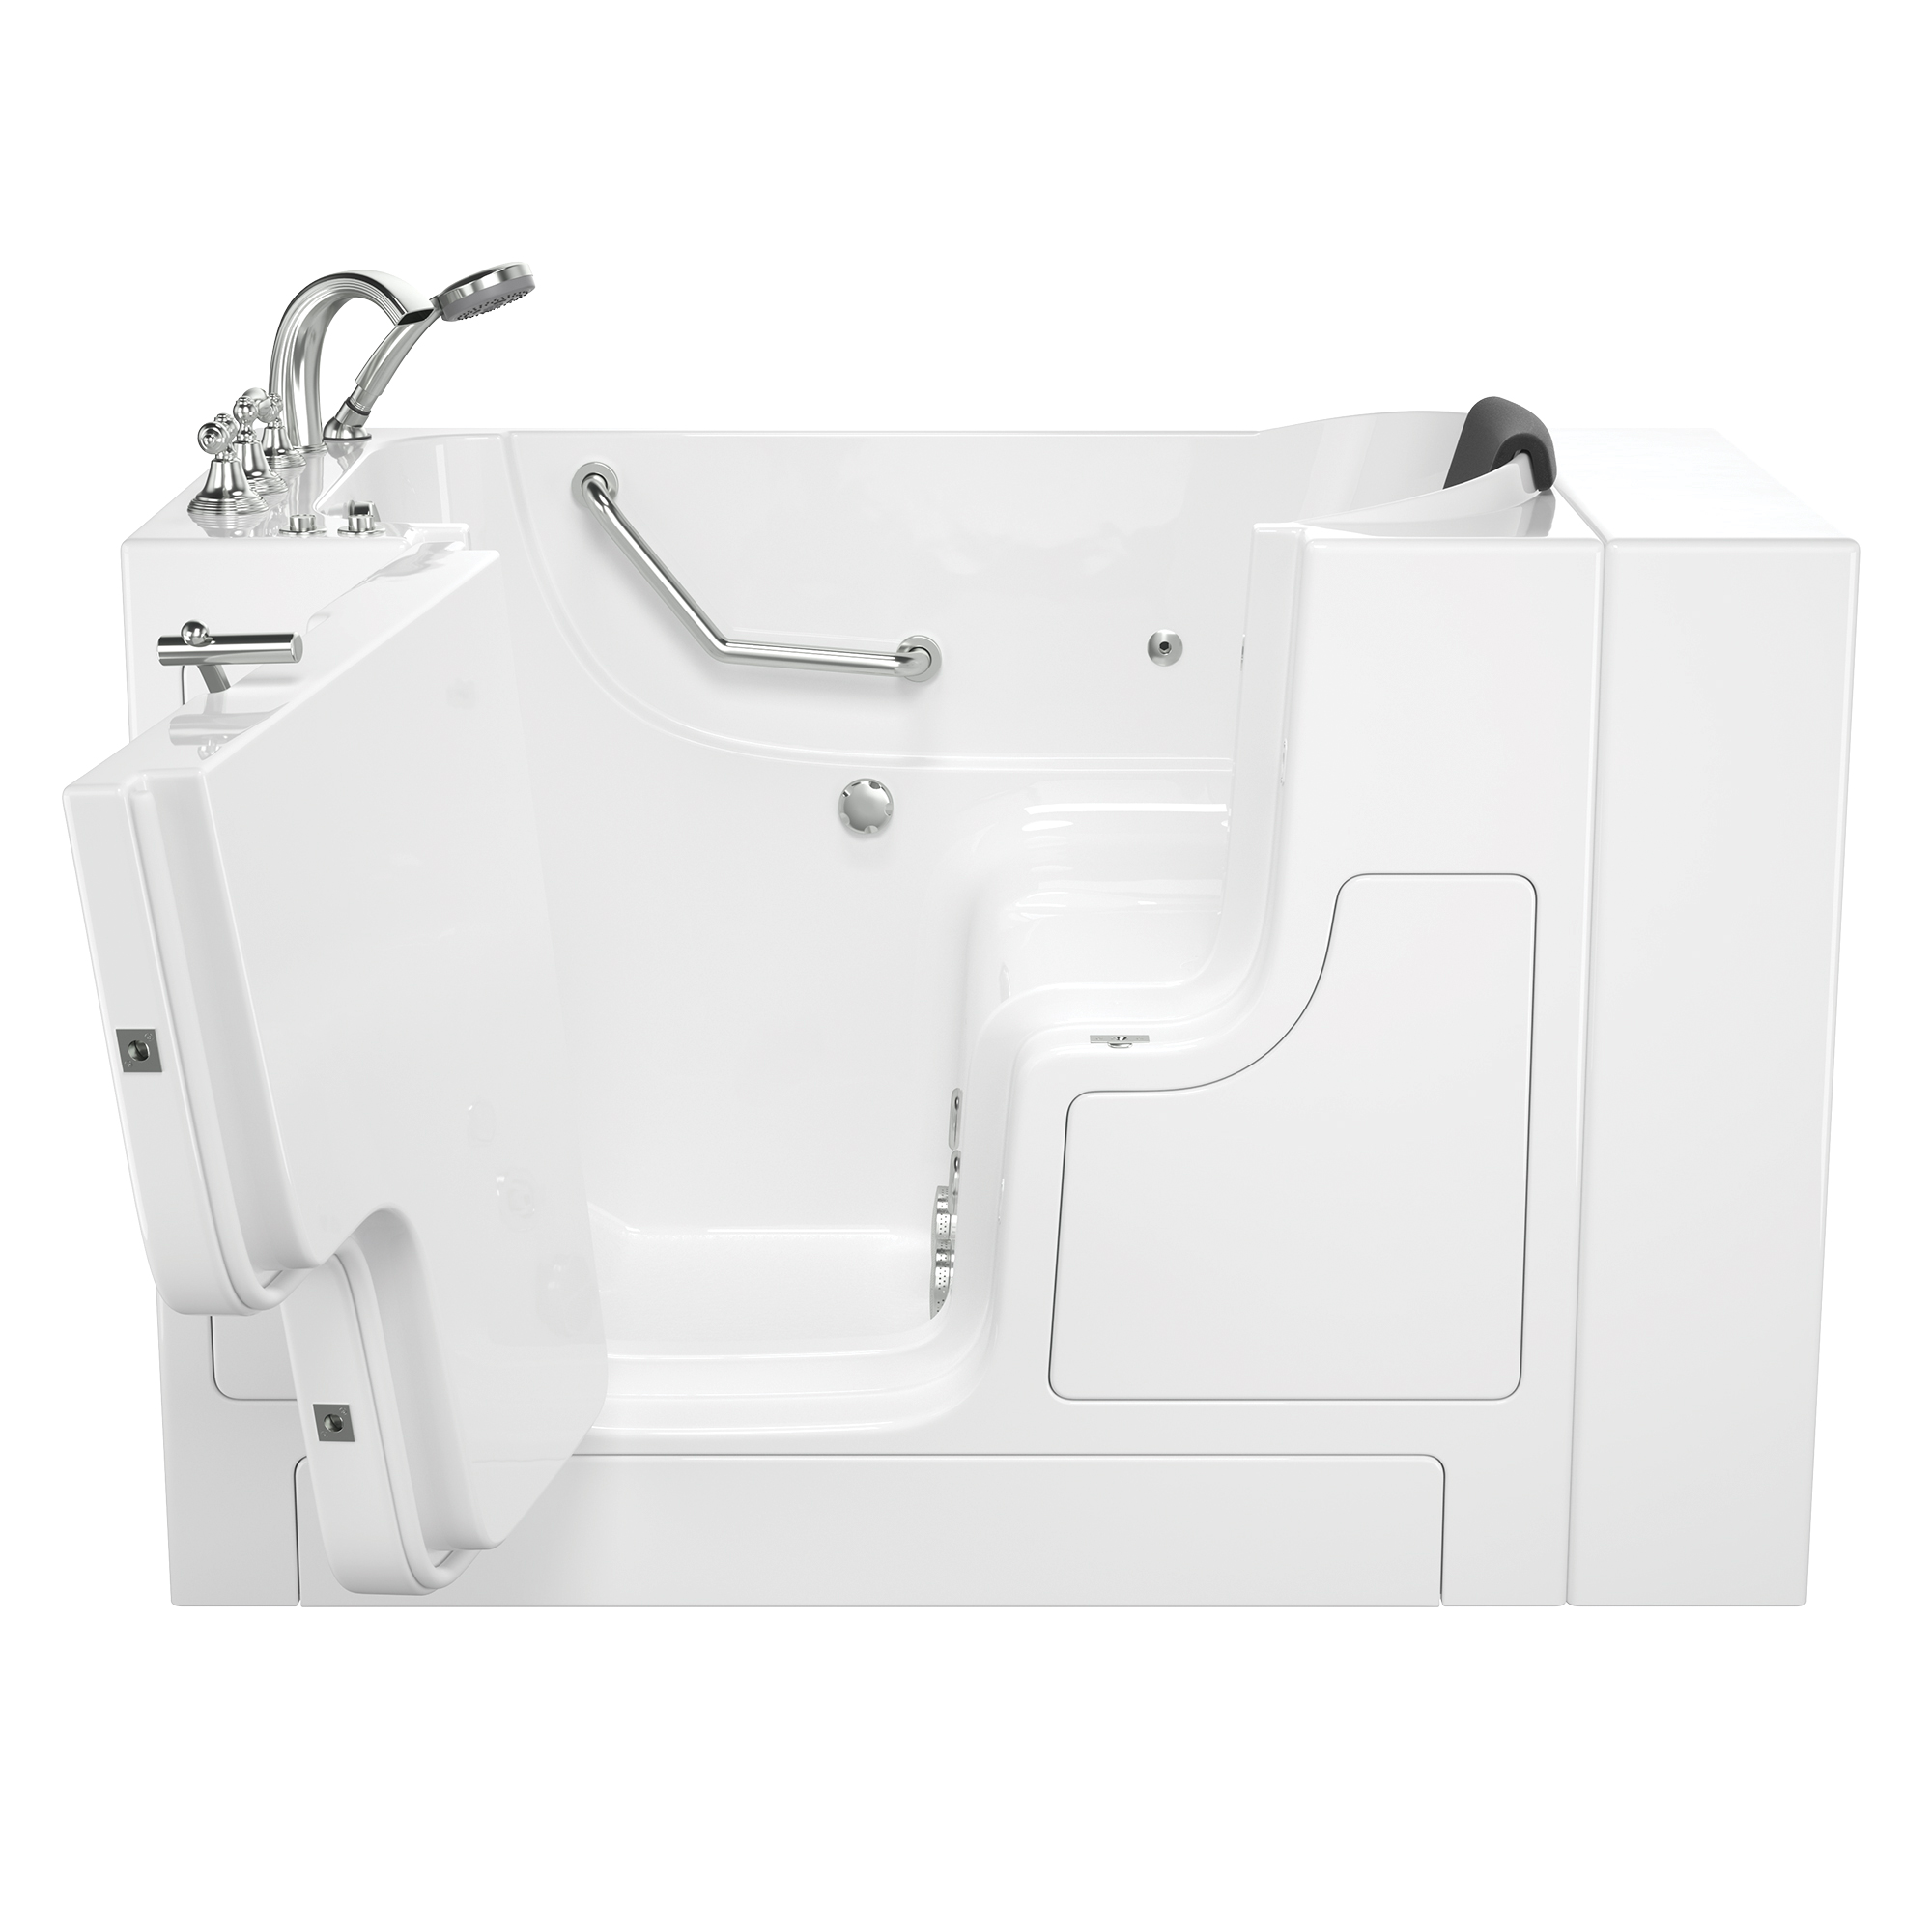 Gelcoat Premium Series 30 x 52 -Inch Walk-in Tub With Whirlpool System - Left-Hand Drain With Faucet